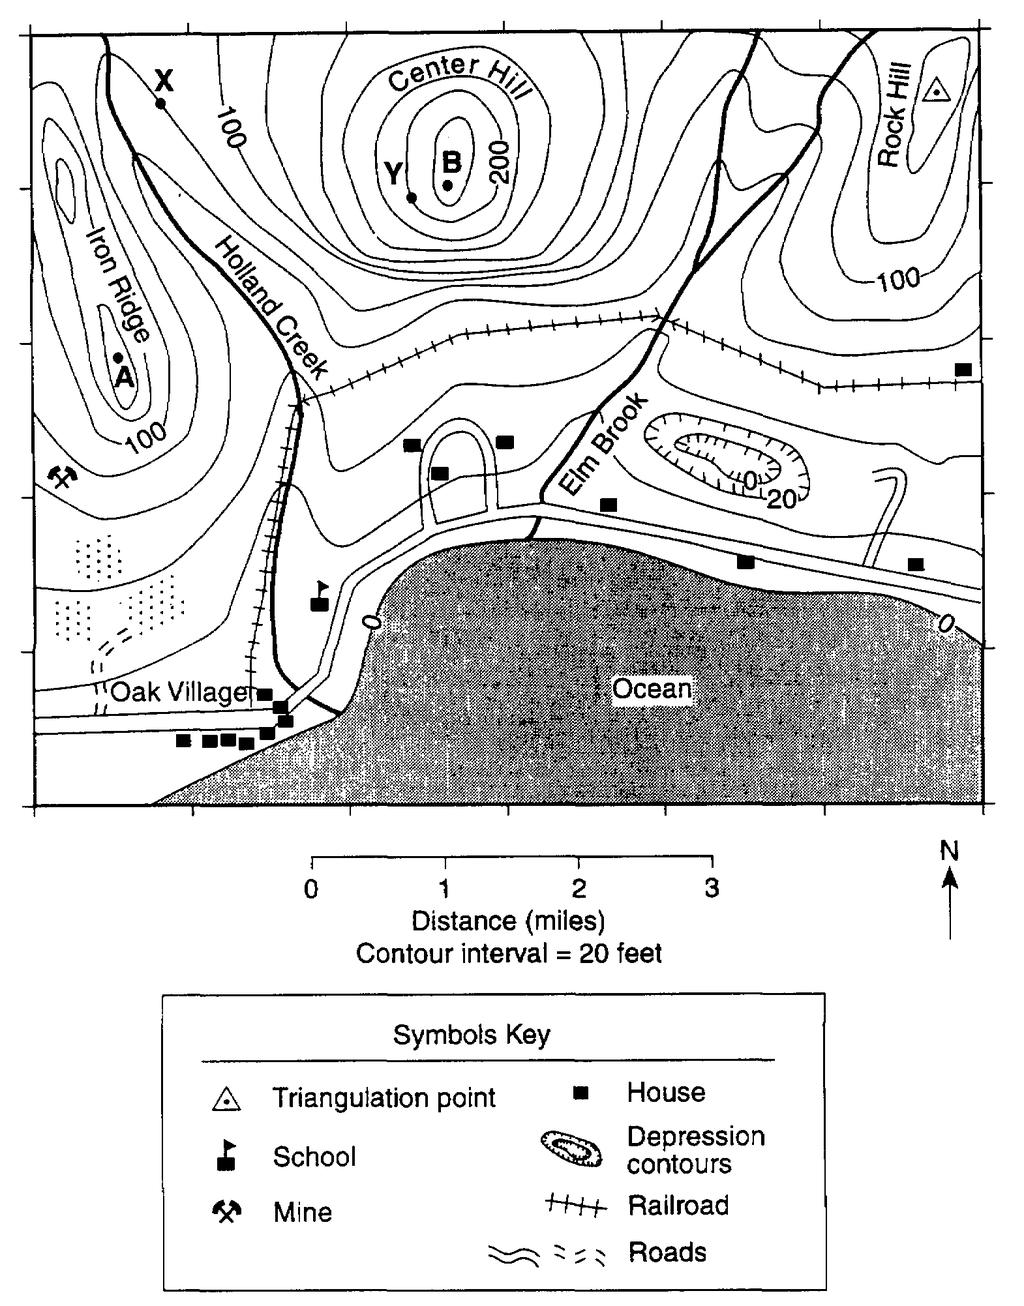 7. Base your answer to the following question on the topographic